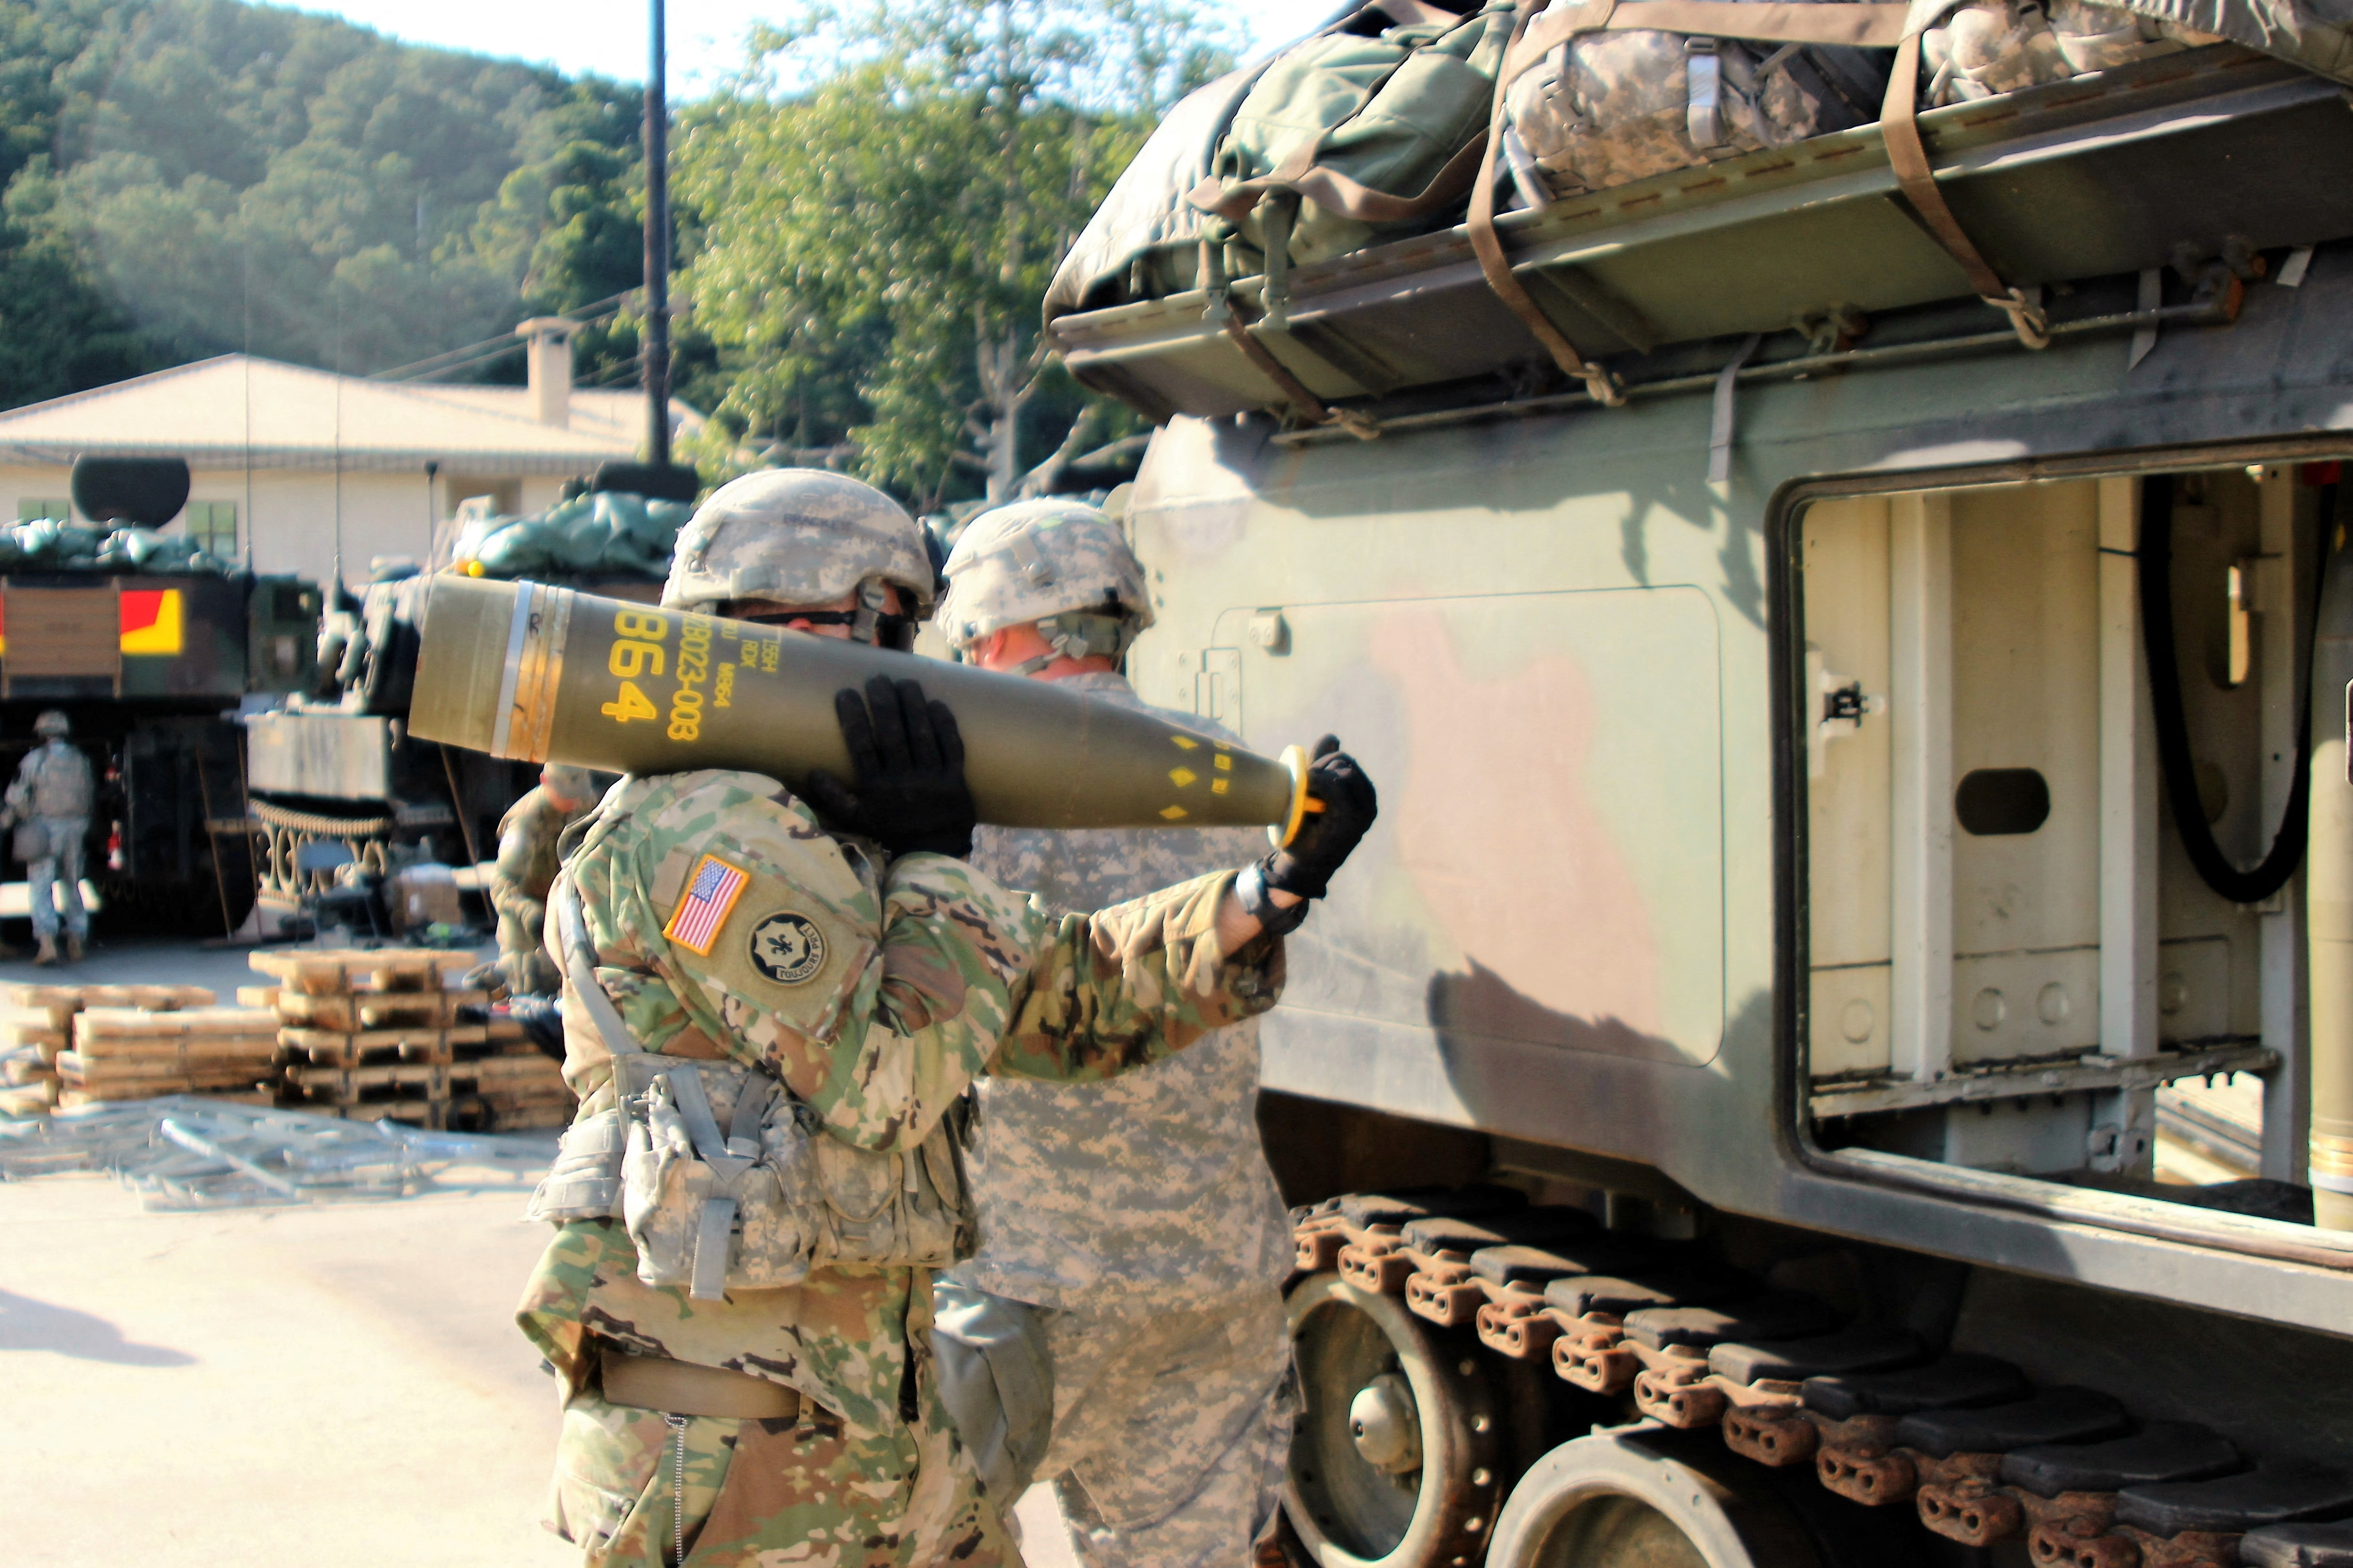 A U.S. Army soldier transfers a 155mm Base Burn Dual Purpose Improved Conventional Munition (DPICM) round into a vehicle. U.S. Army/2nd Lt. Gabriel Jenko/ Reuters